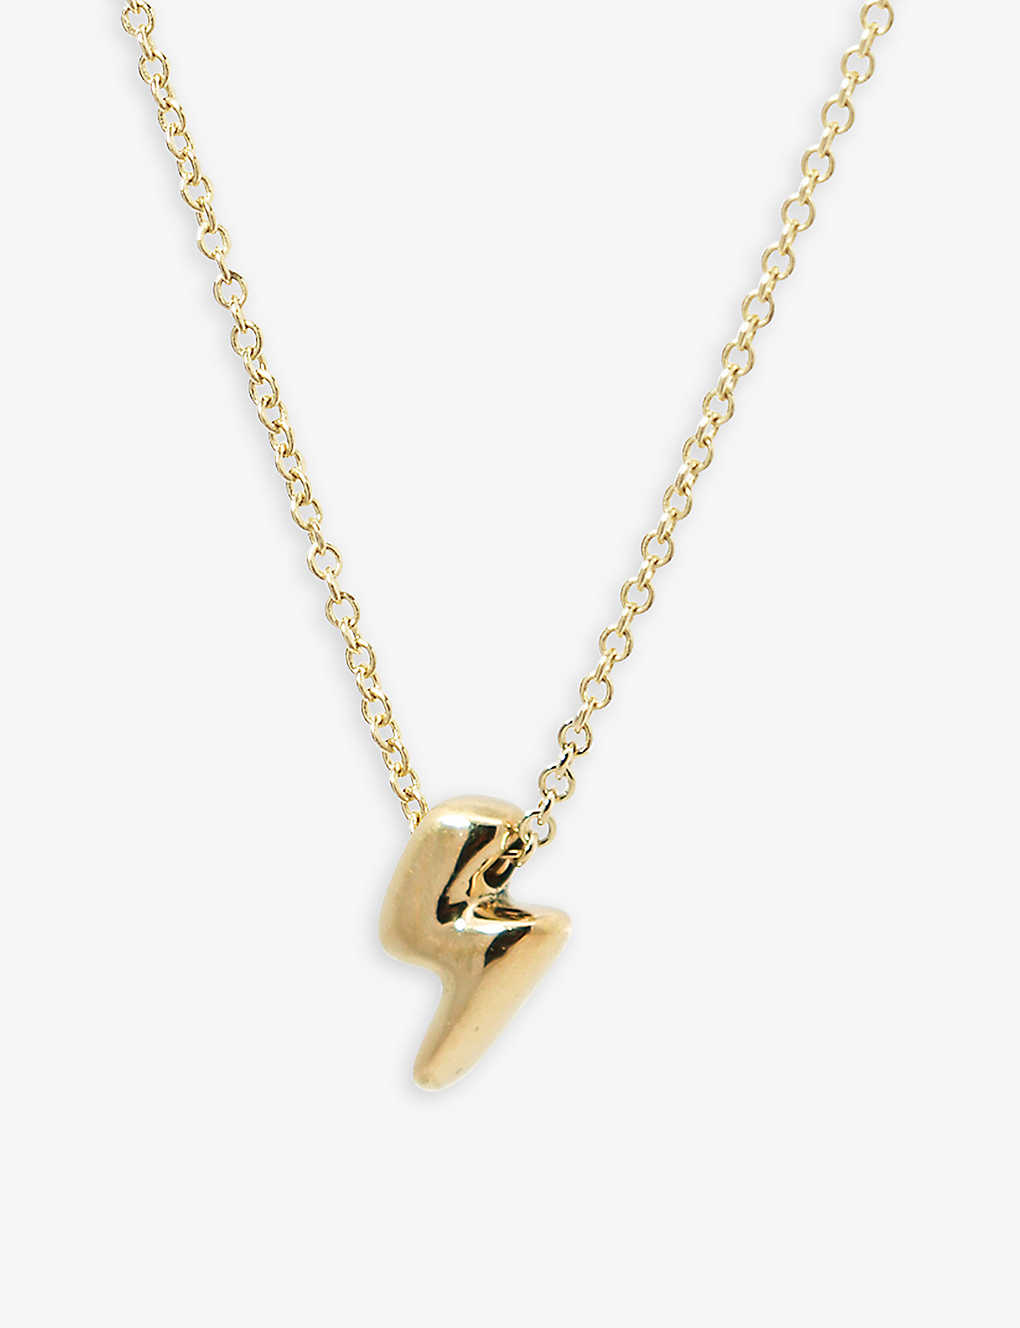 The Alkemistry Womens Yellow Gold Chubby Lightning Bolt 18ct Yellow-gold Pendant Necklace